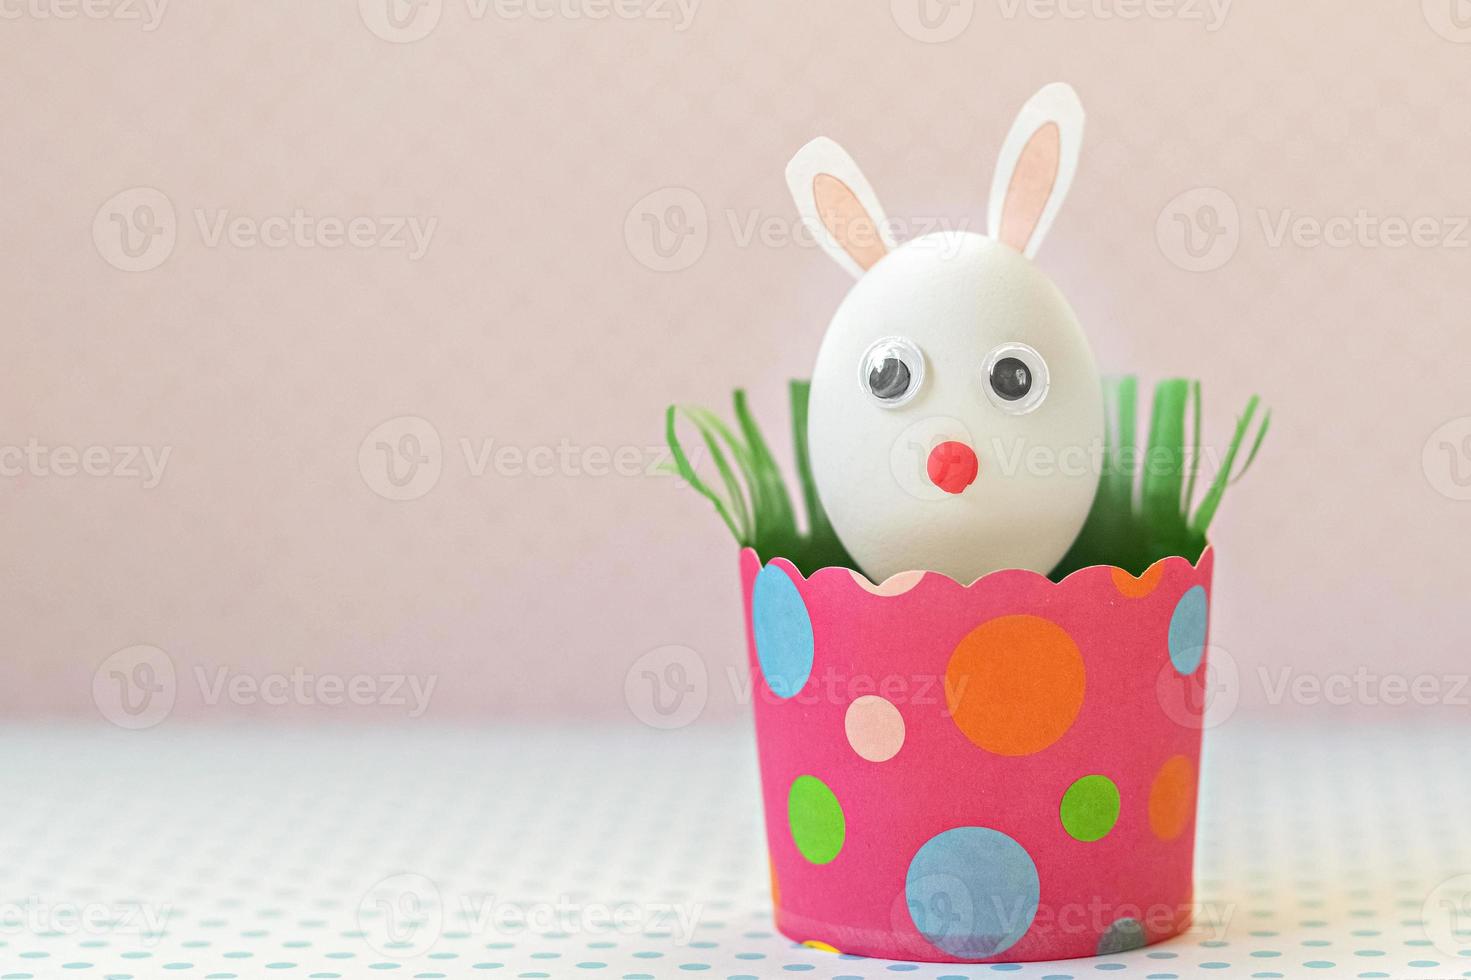 White chicken egg with bunny ears and a muzzle in an environmentally friendly pink paper tray, box. Happy Easter holiday concept. photo